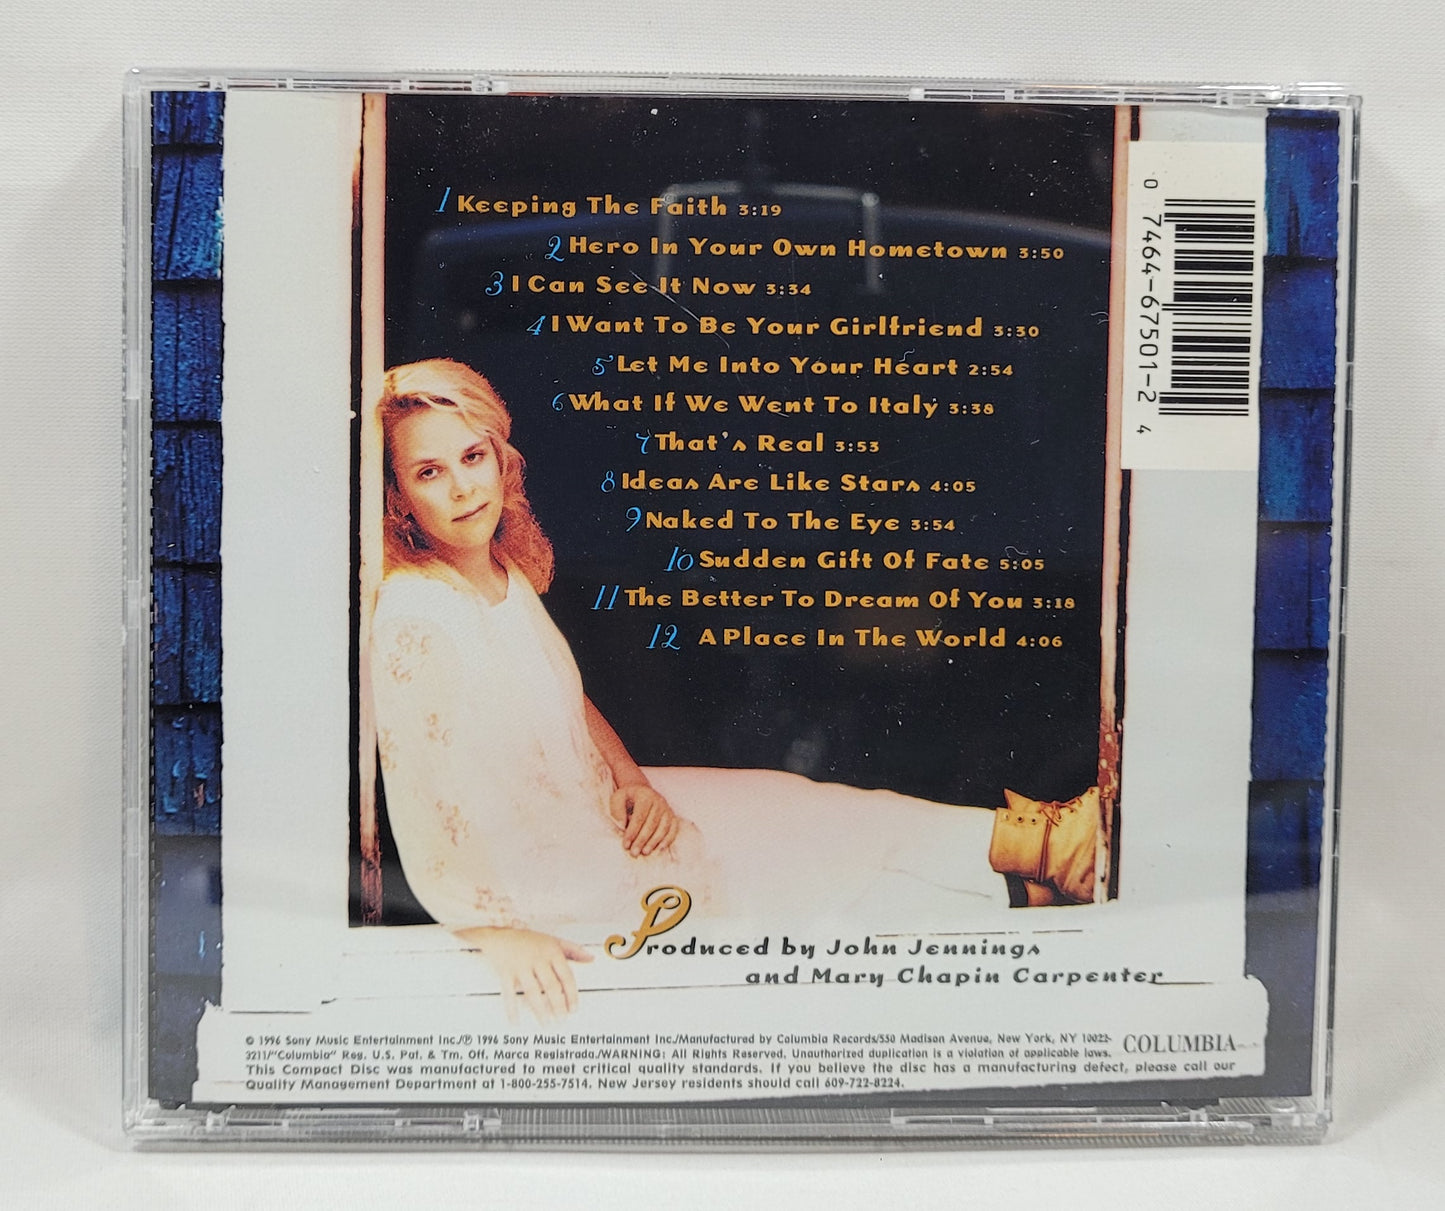 Mary Chapin Carpenter - A Place in the World [1996 Used CD] [B]